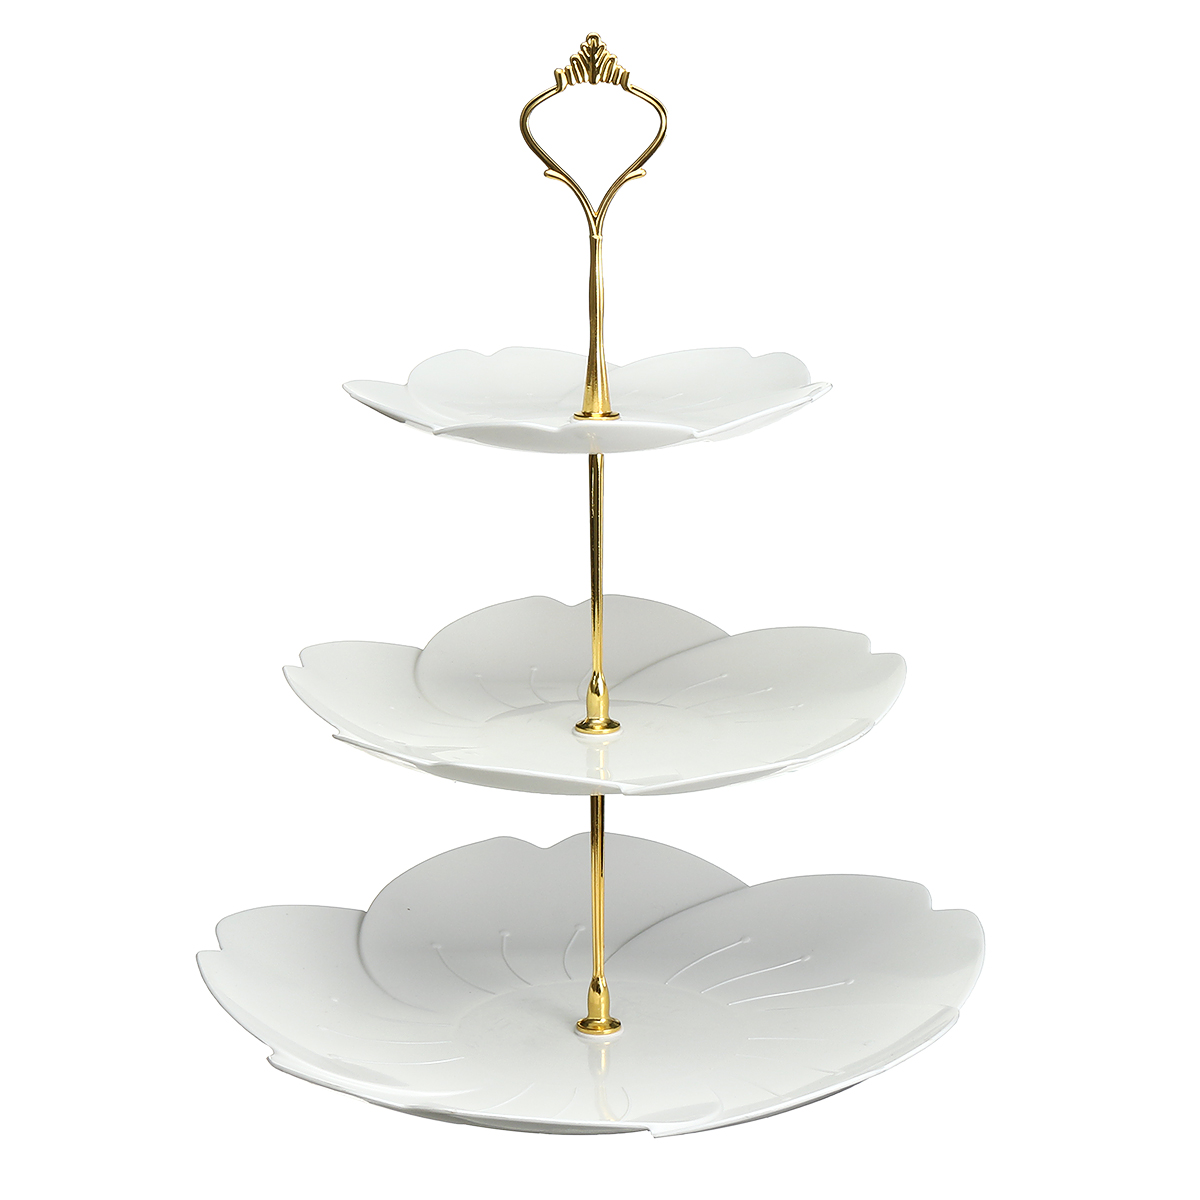 European-style-23-Tier-Fruit-Plate-Dessert-Tray-Cake-Table-Multi-layer-Cake-Stand-Cake-Setting-Table-1926348-10